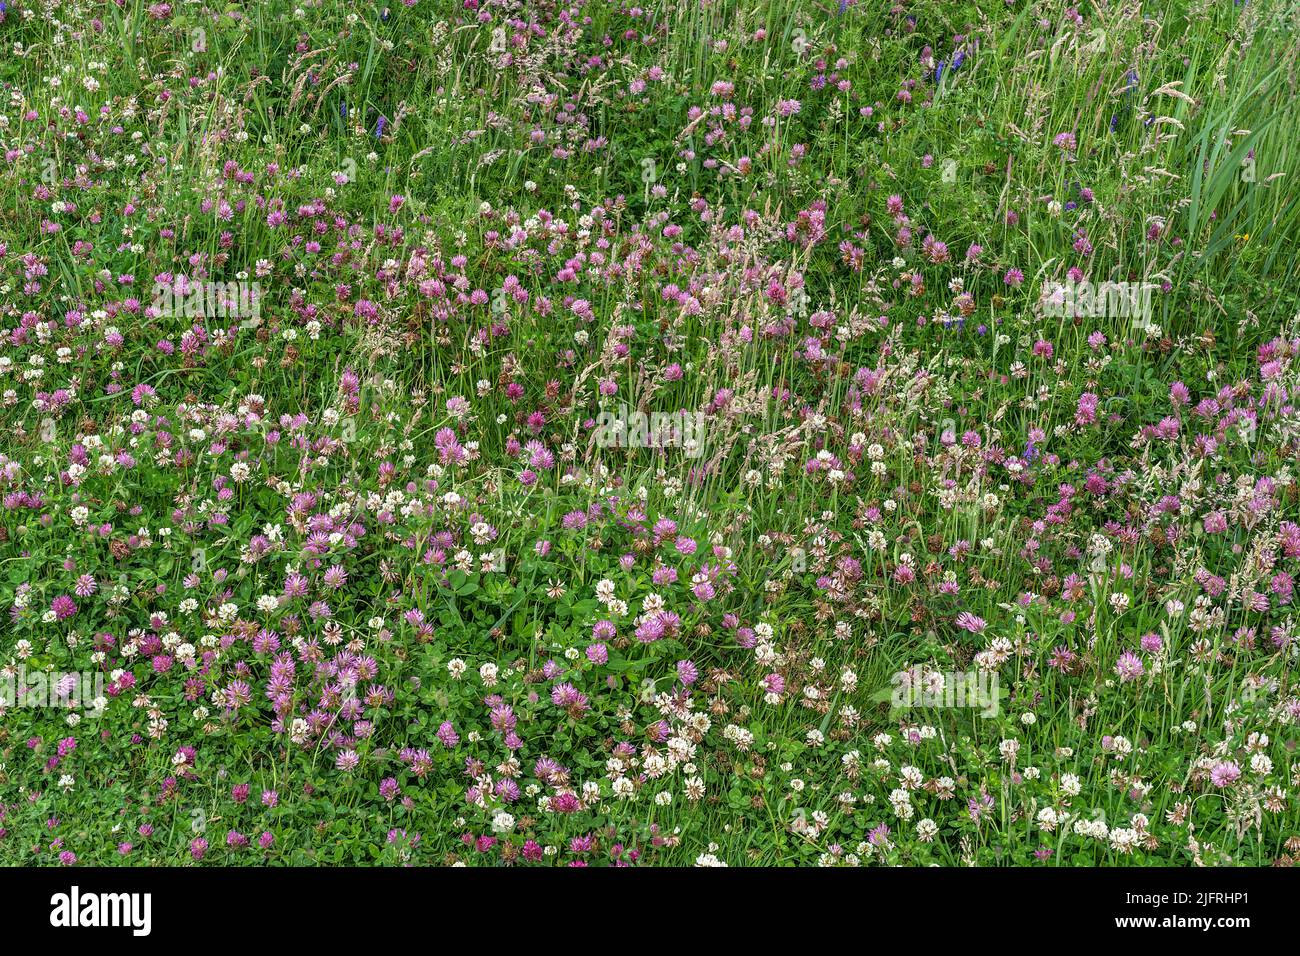 Red Clover (Trifolium pratense) and White Clover (Trifolium repens) growing by the shore of the Dee Estuary near Hoylake Wirral UK July 2021 Stock Photo